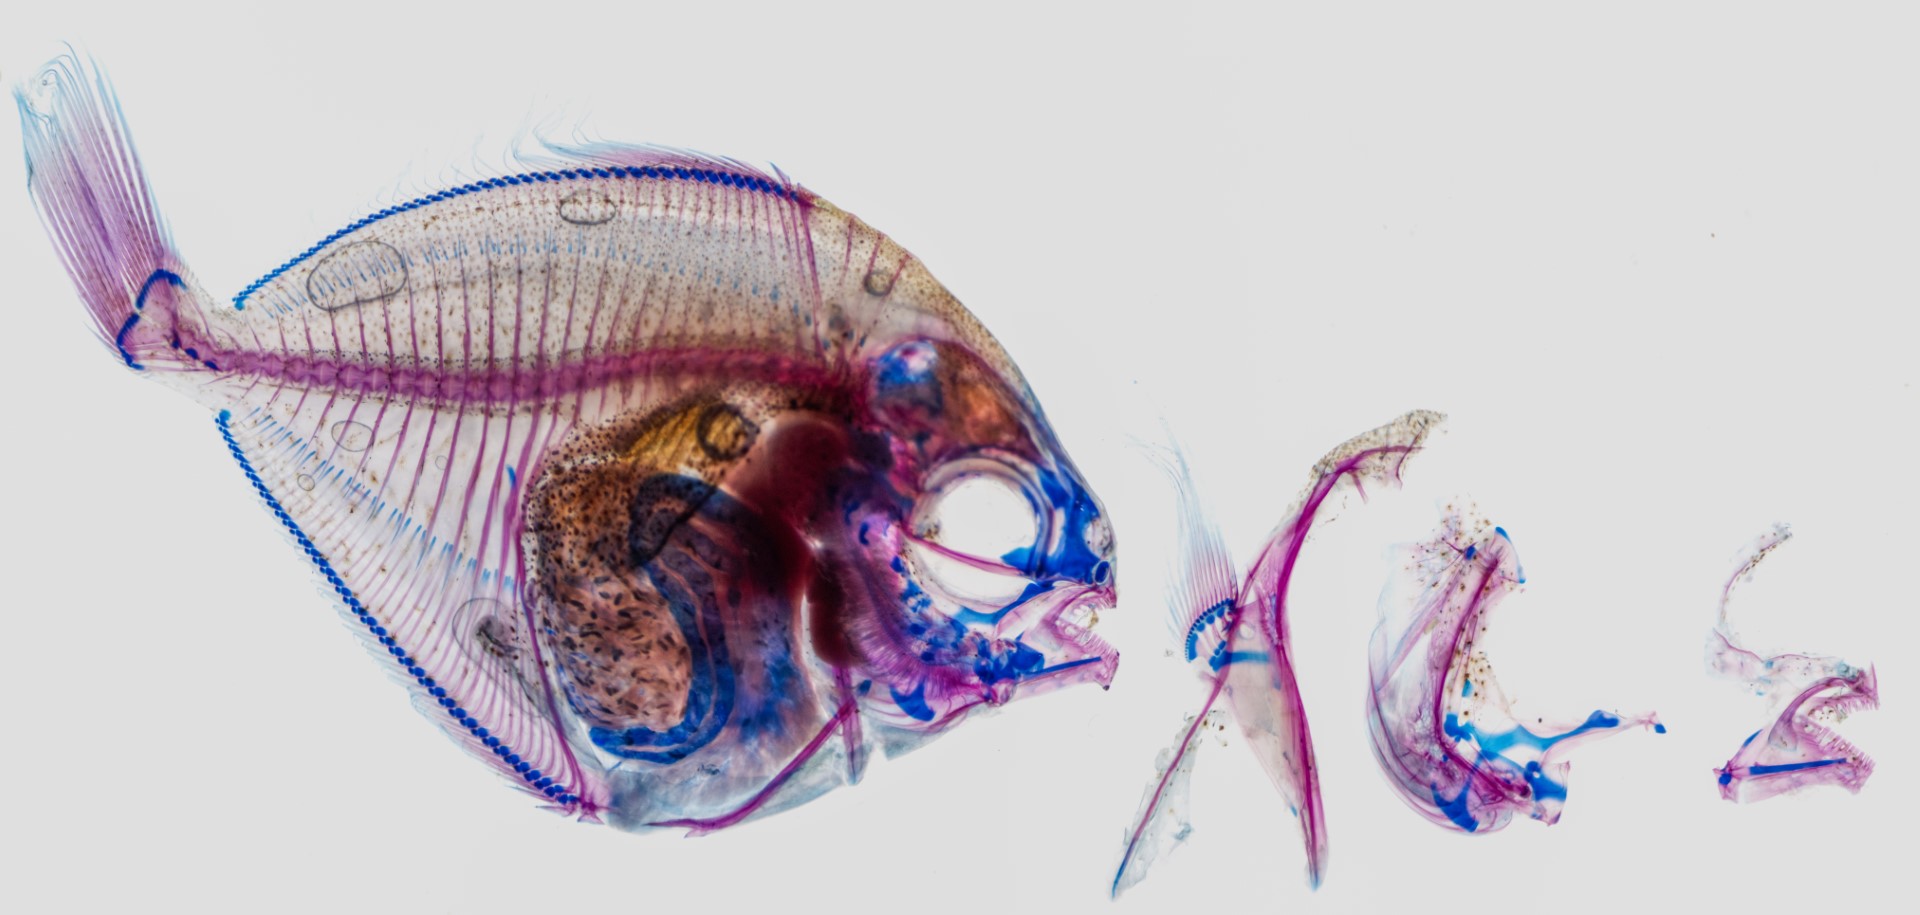 This is a sample of a fish that I have cleared and stained, and then photographed it through the microscope. This technique allows you to see the bones and cartilage of the fish unobscured by muscles and other tissues. The bones are stained in red and the cartilage is stained in blue. This is a Butterfish (genus Peprilus) that I dissected after clearing and staining, and I arranged in a sort of exploded view.